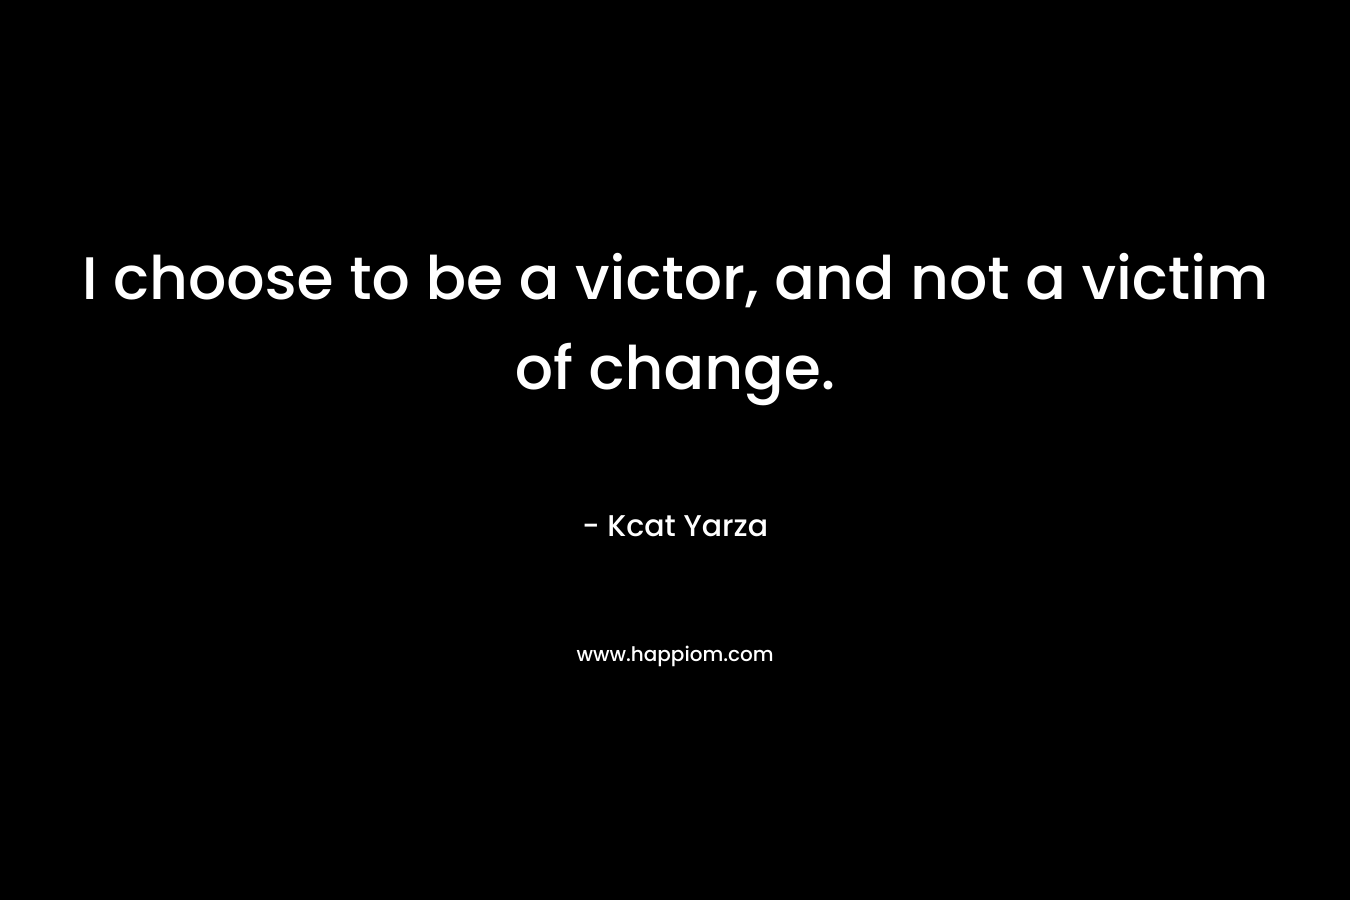 I choose to be a victor, and not a victim of change. – Kcat Yarza